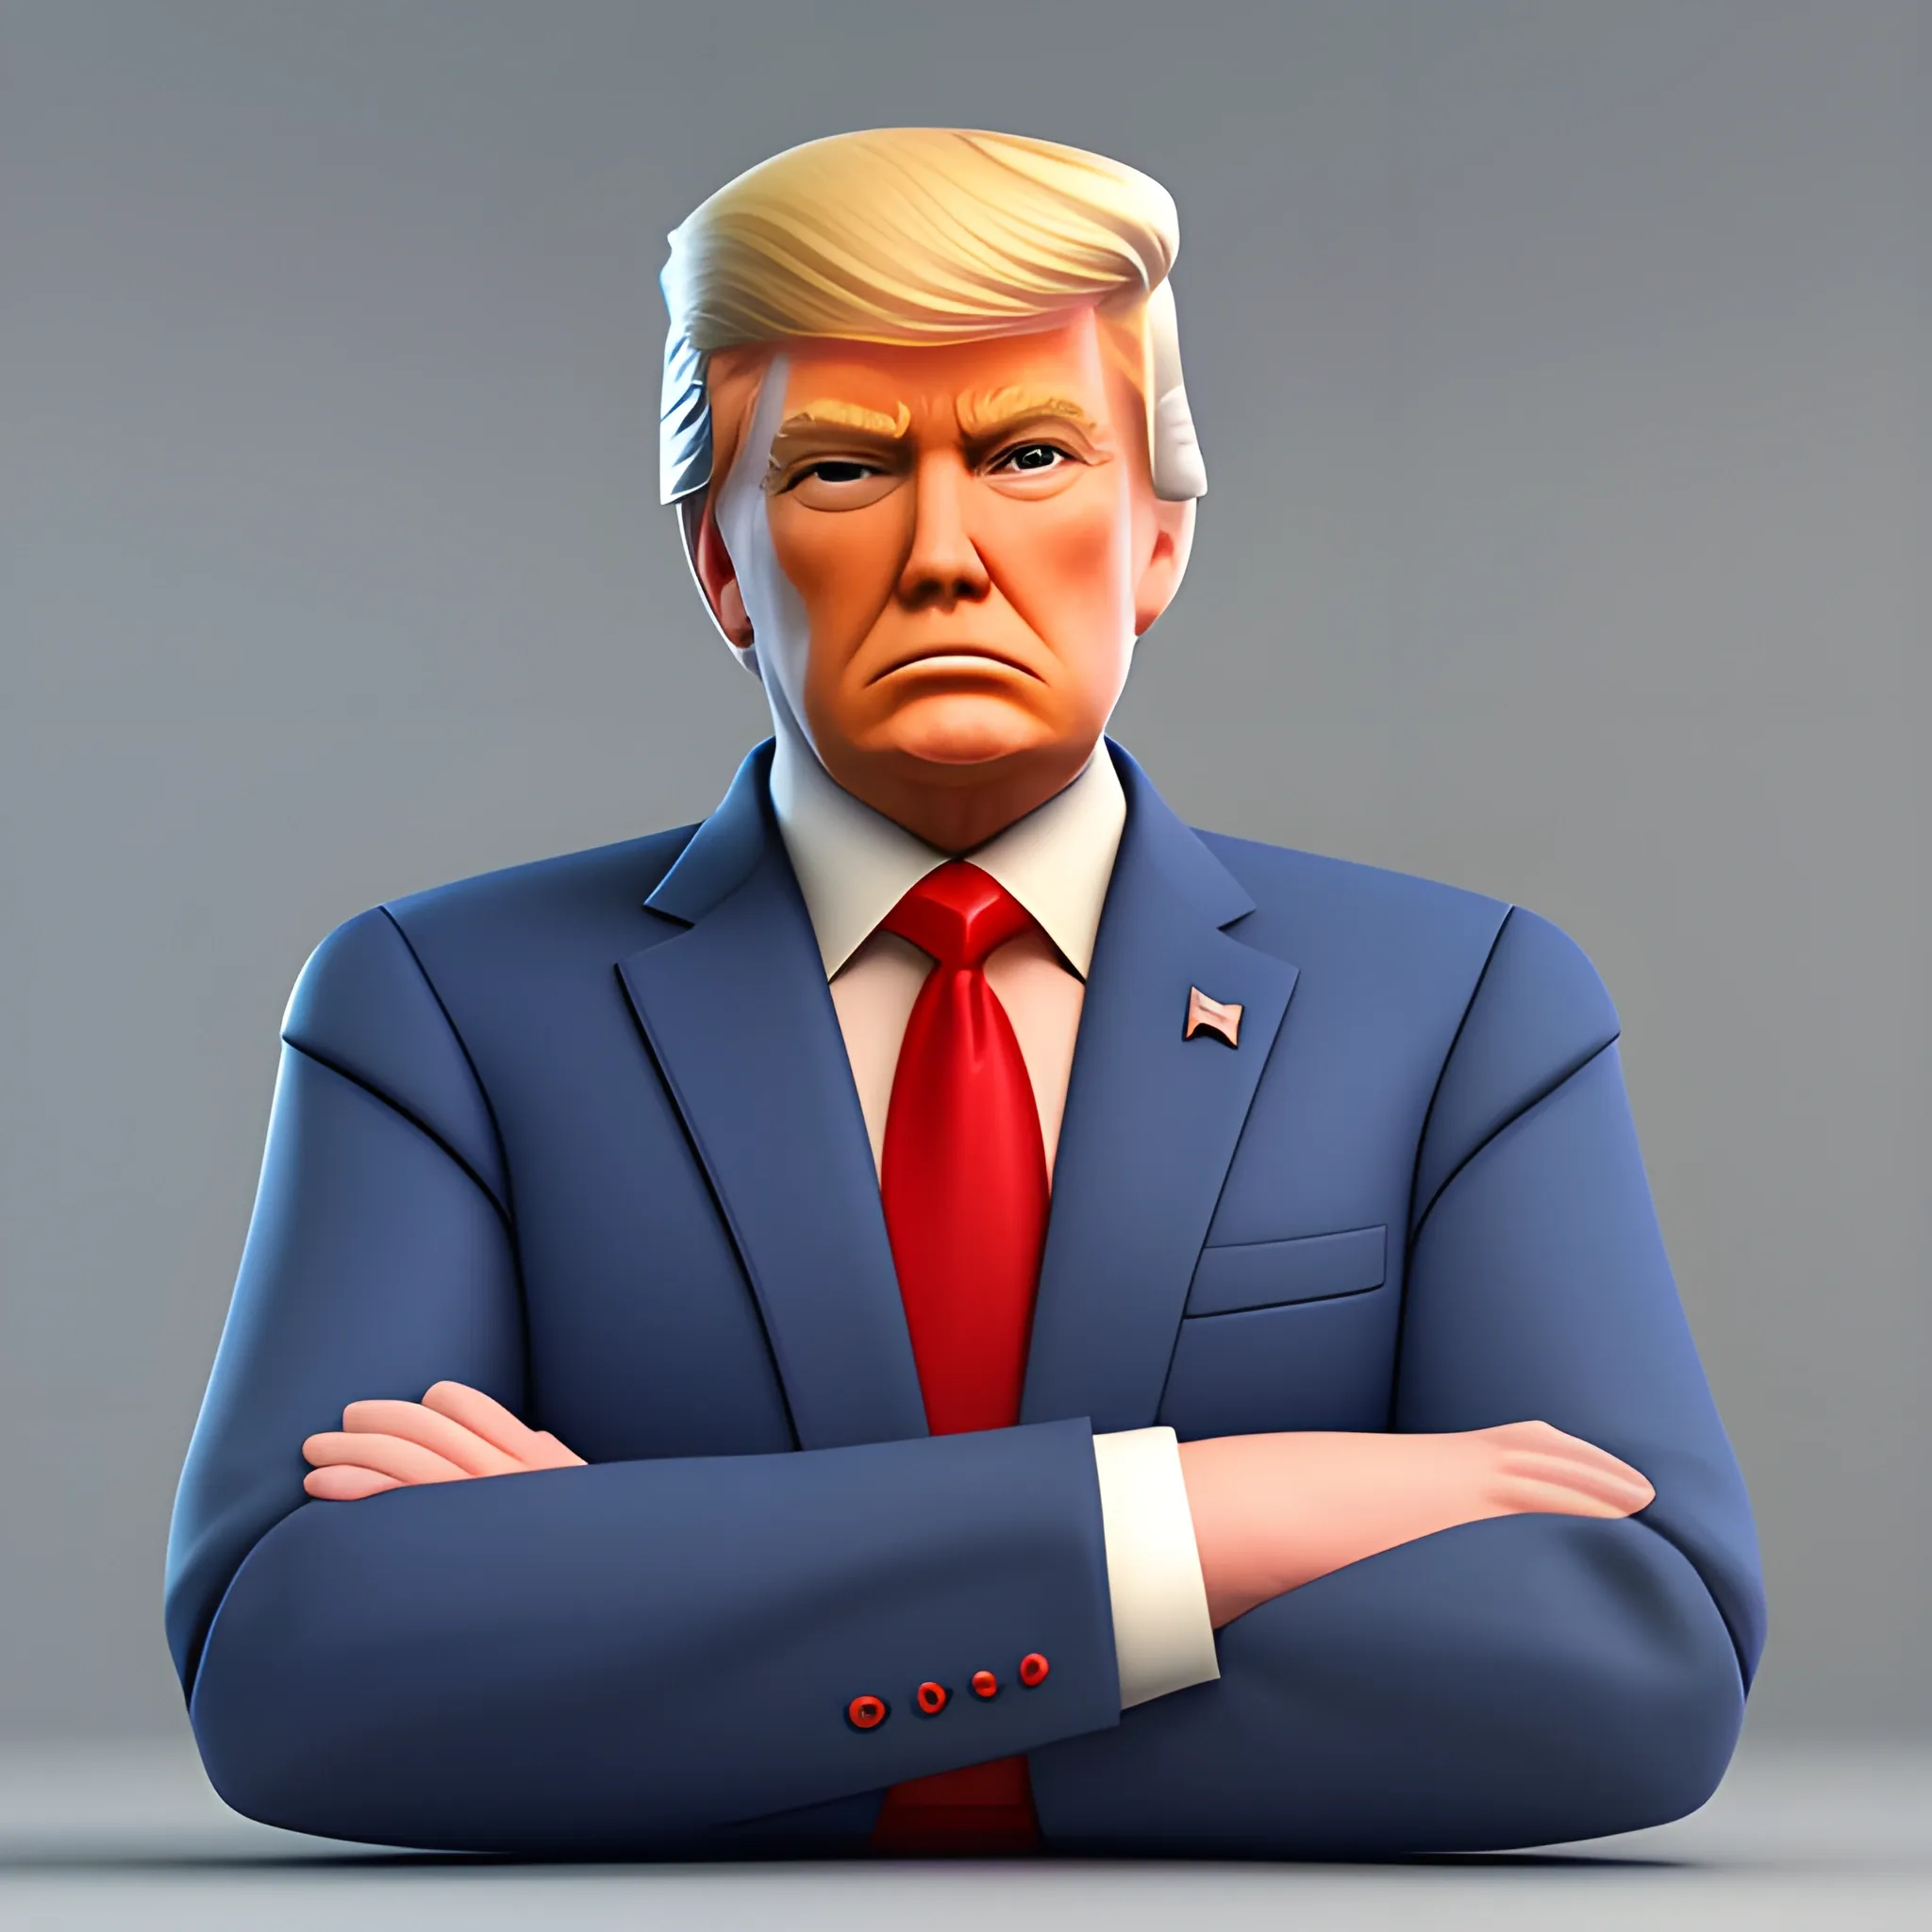 3D render of Donald Trump with his arms crossed looking straight into the camera. He looks plastic. his face is clear and he is in the artstyle of fortnite. he has a navy blue suit on with a red tie. He looks kind of goofy looking. half body shot. 3D , 3D, Cartoon

